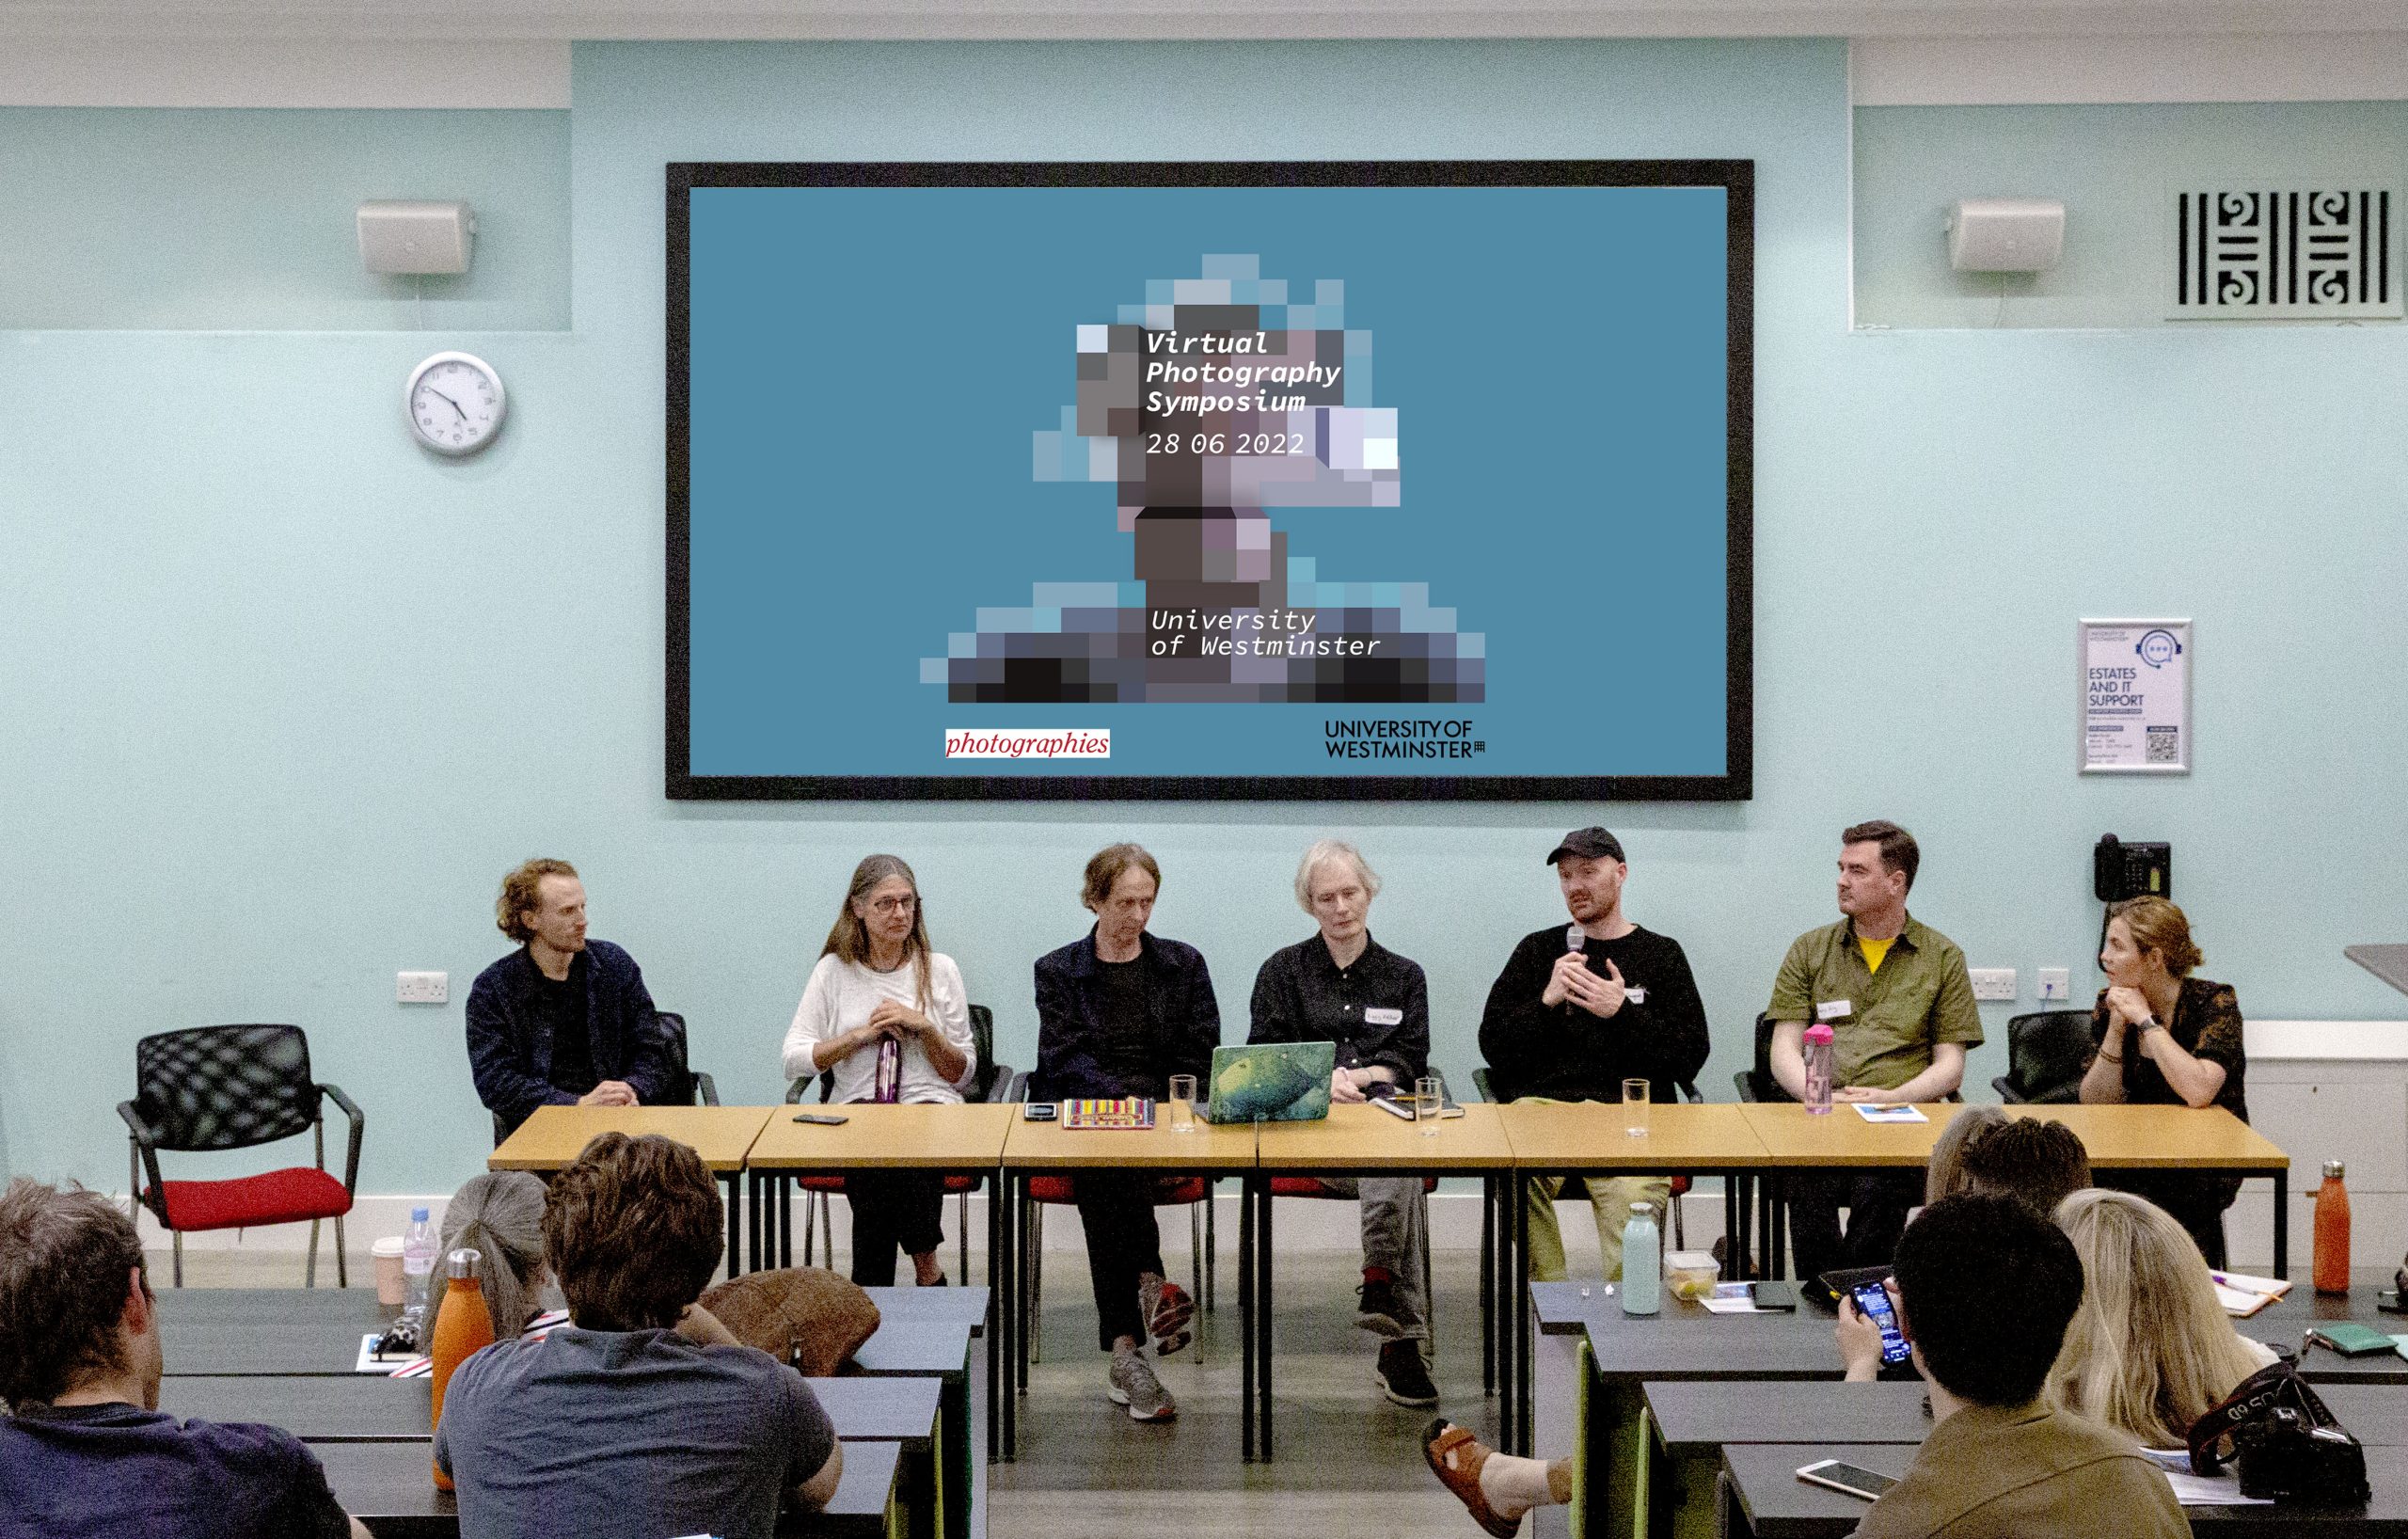 Photography of a panel discussion from the conference 'Virtual Photography Symposium'. Seven people seated at a long table, poster for the conference projected on a screen above.